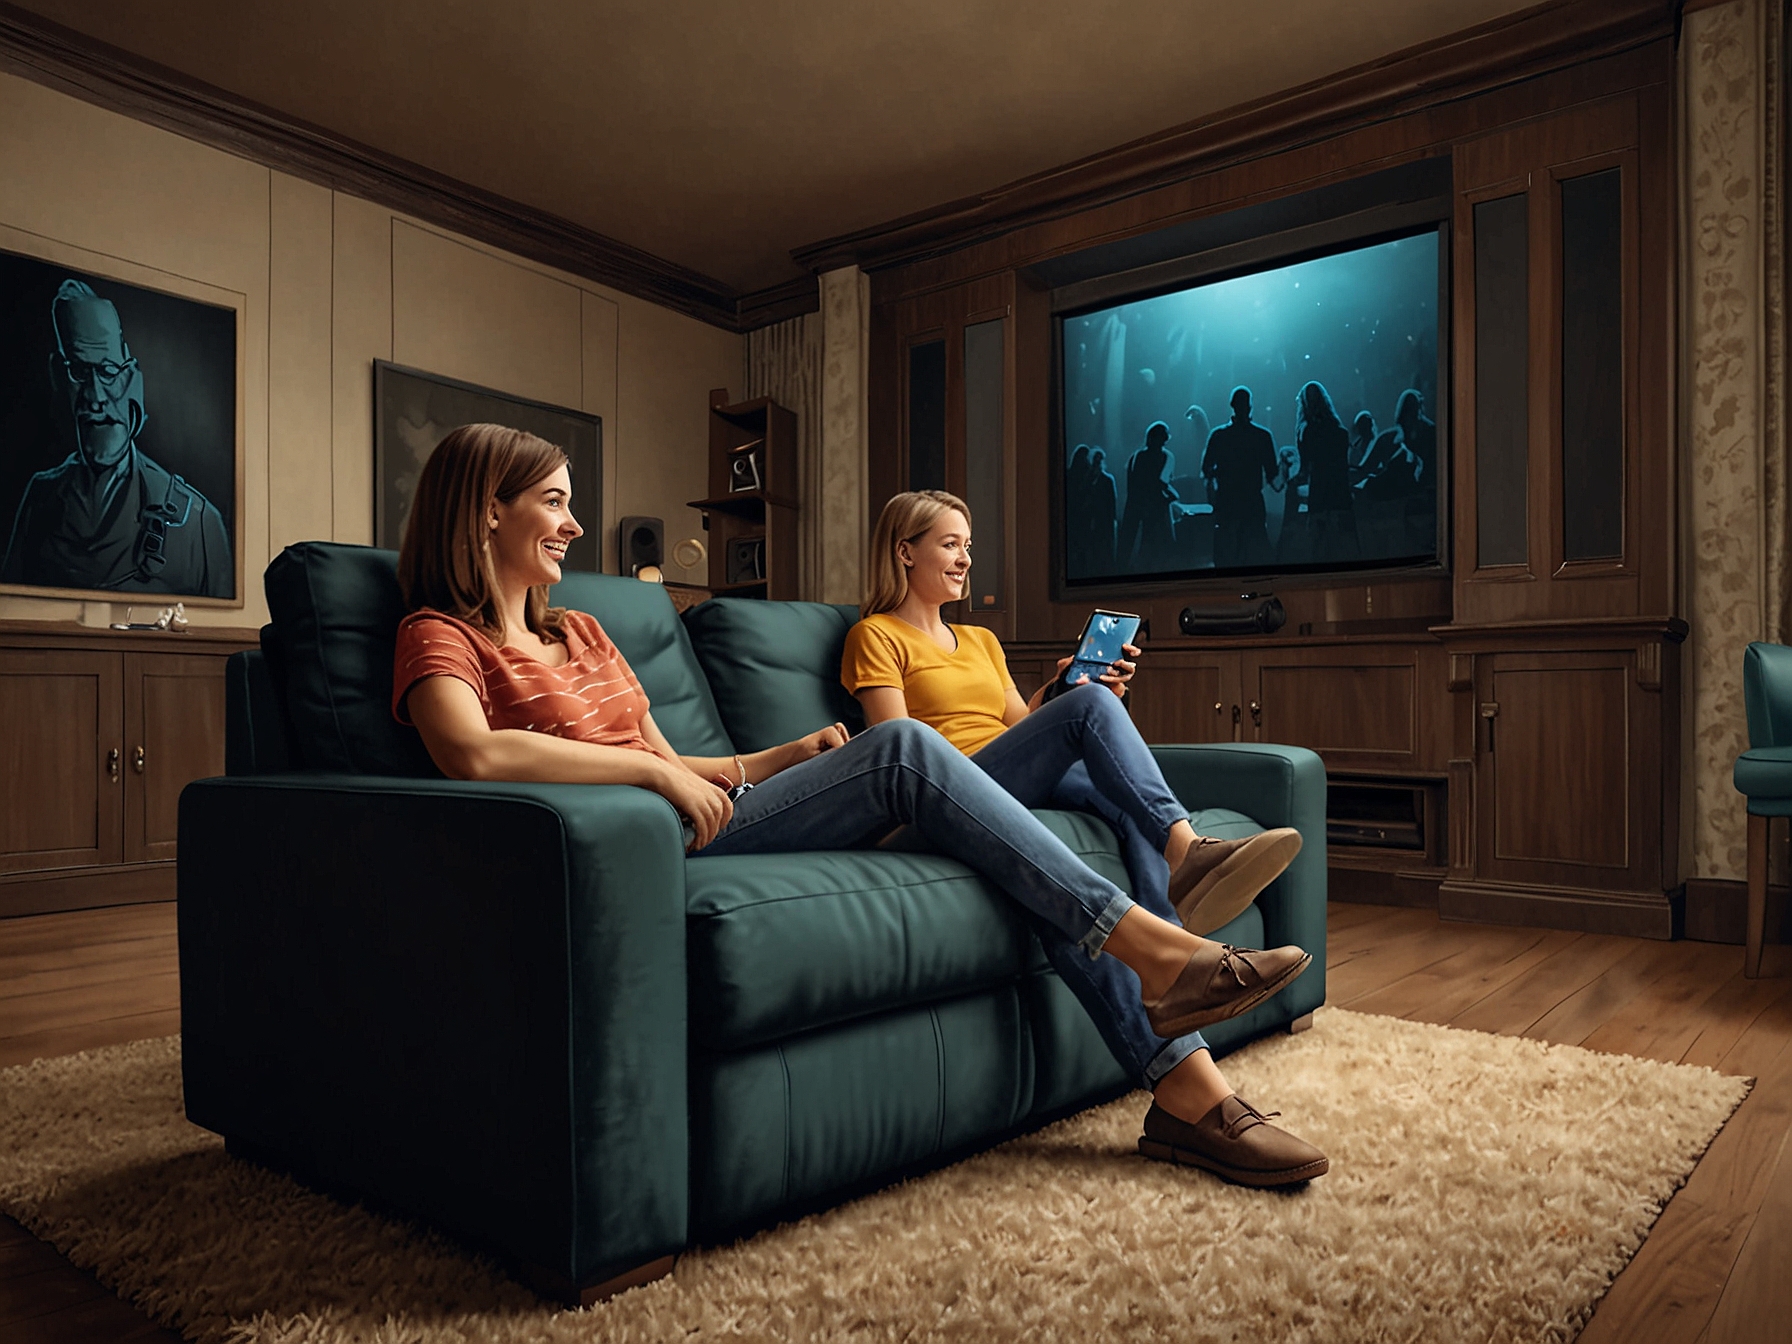 A family enjoying a high-quality home theater setup, illustrating the growing demand for enhanced home entertainment experiences driven by rising disposable incomes.